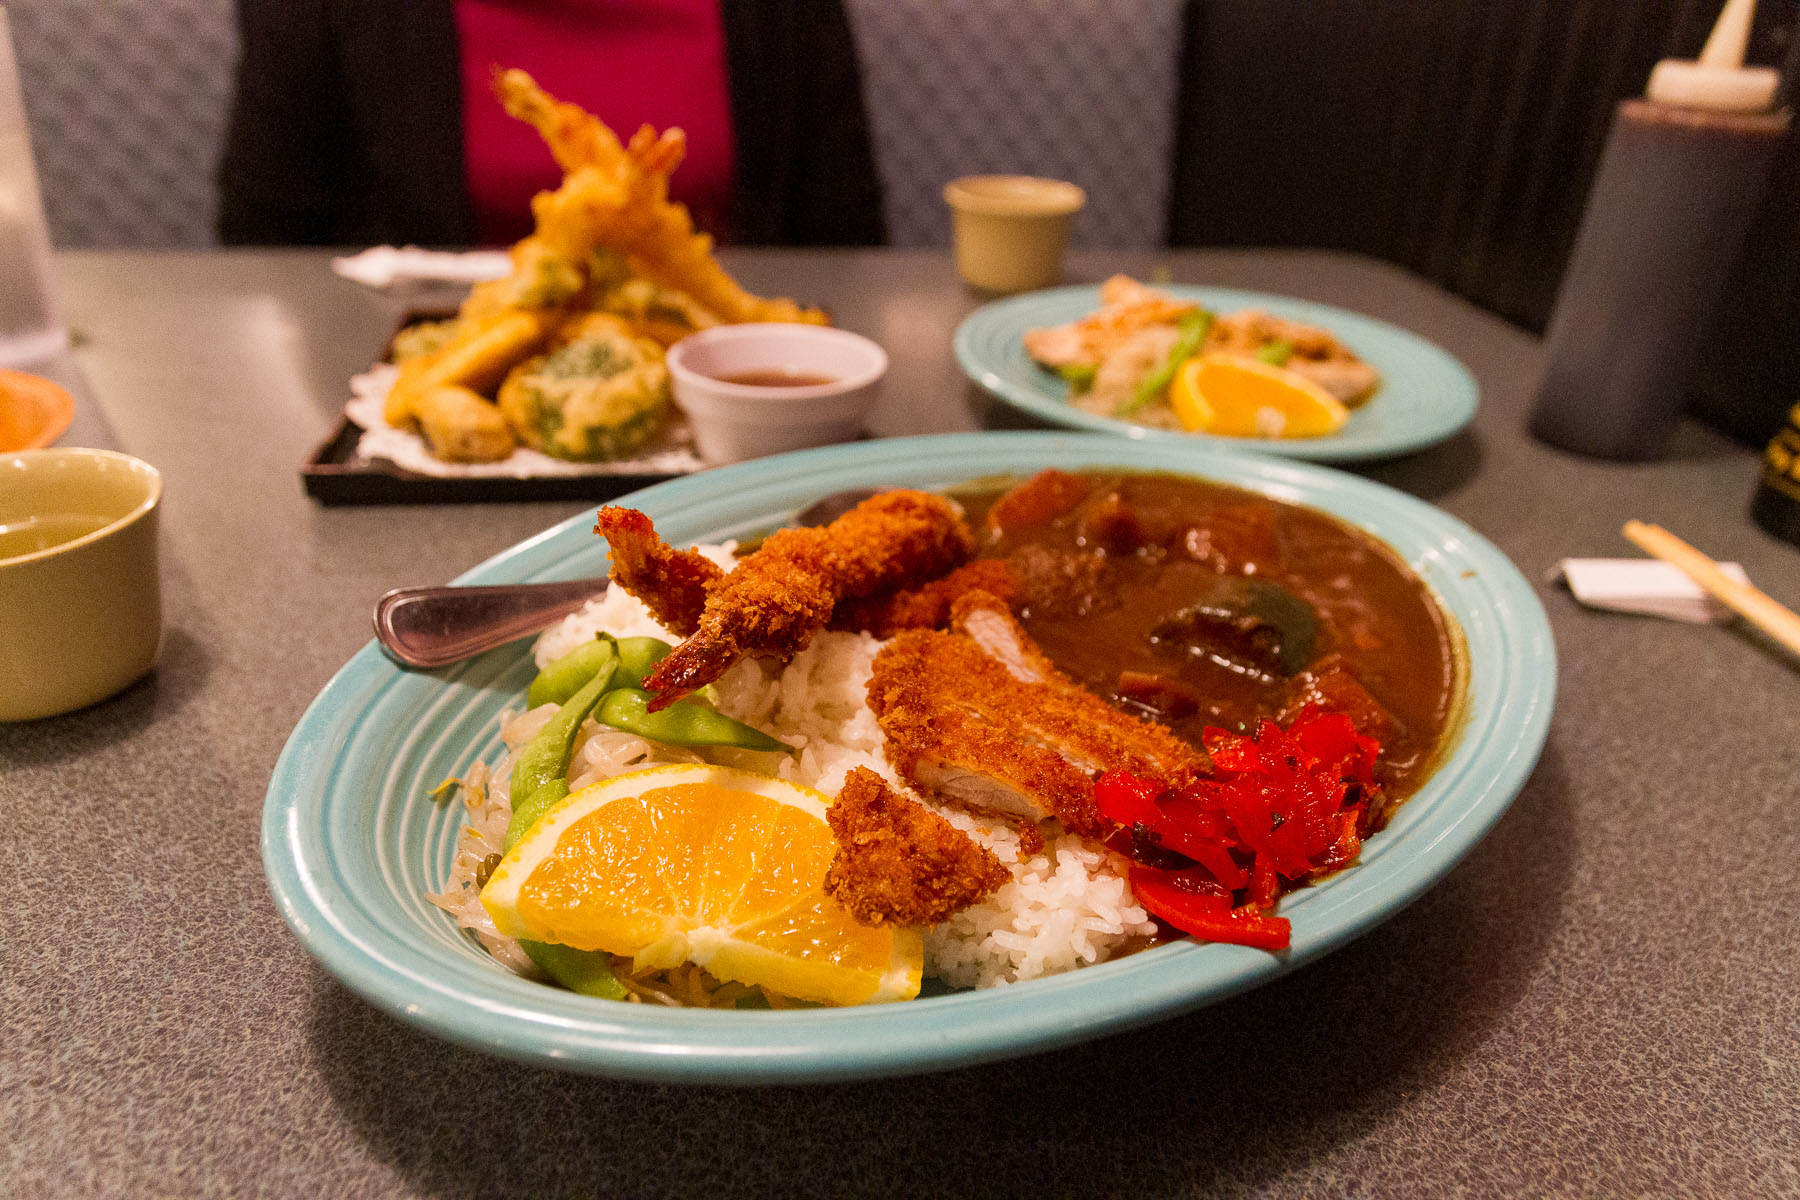 A spread of homey Japanese dishes; a plate of Japanese brown curry over rice is in the foreground.